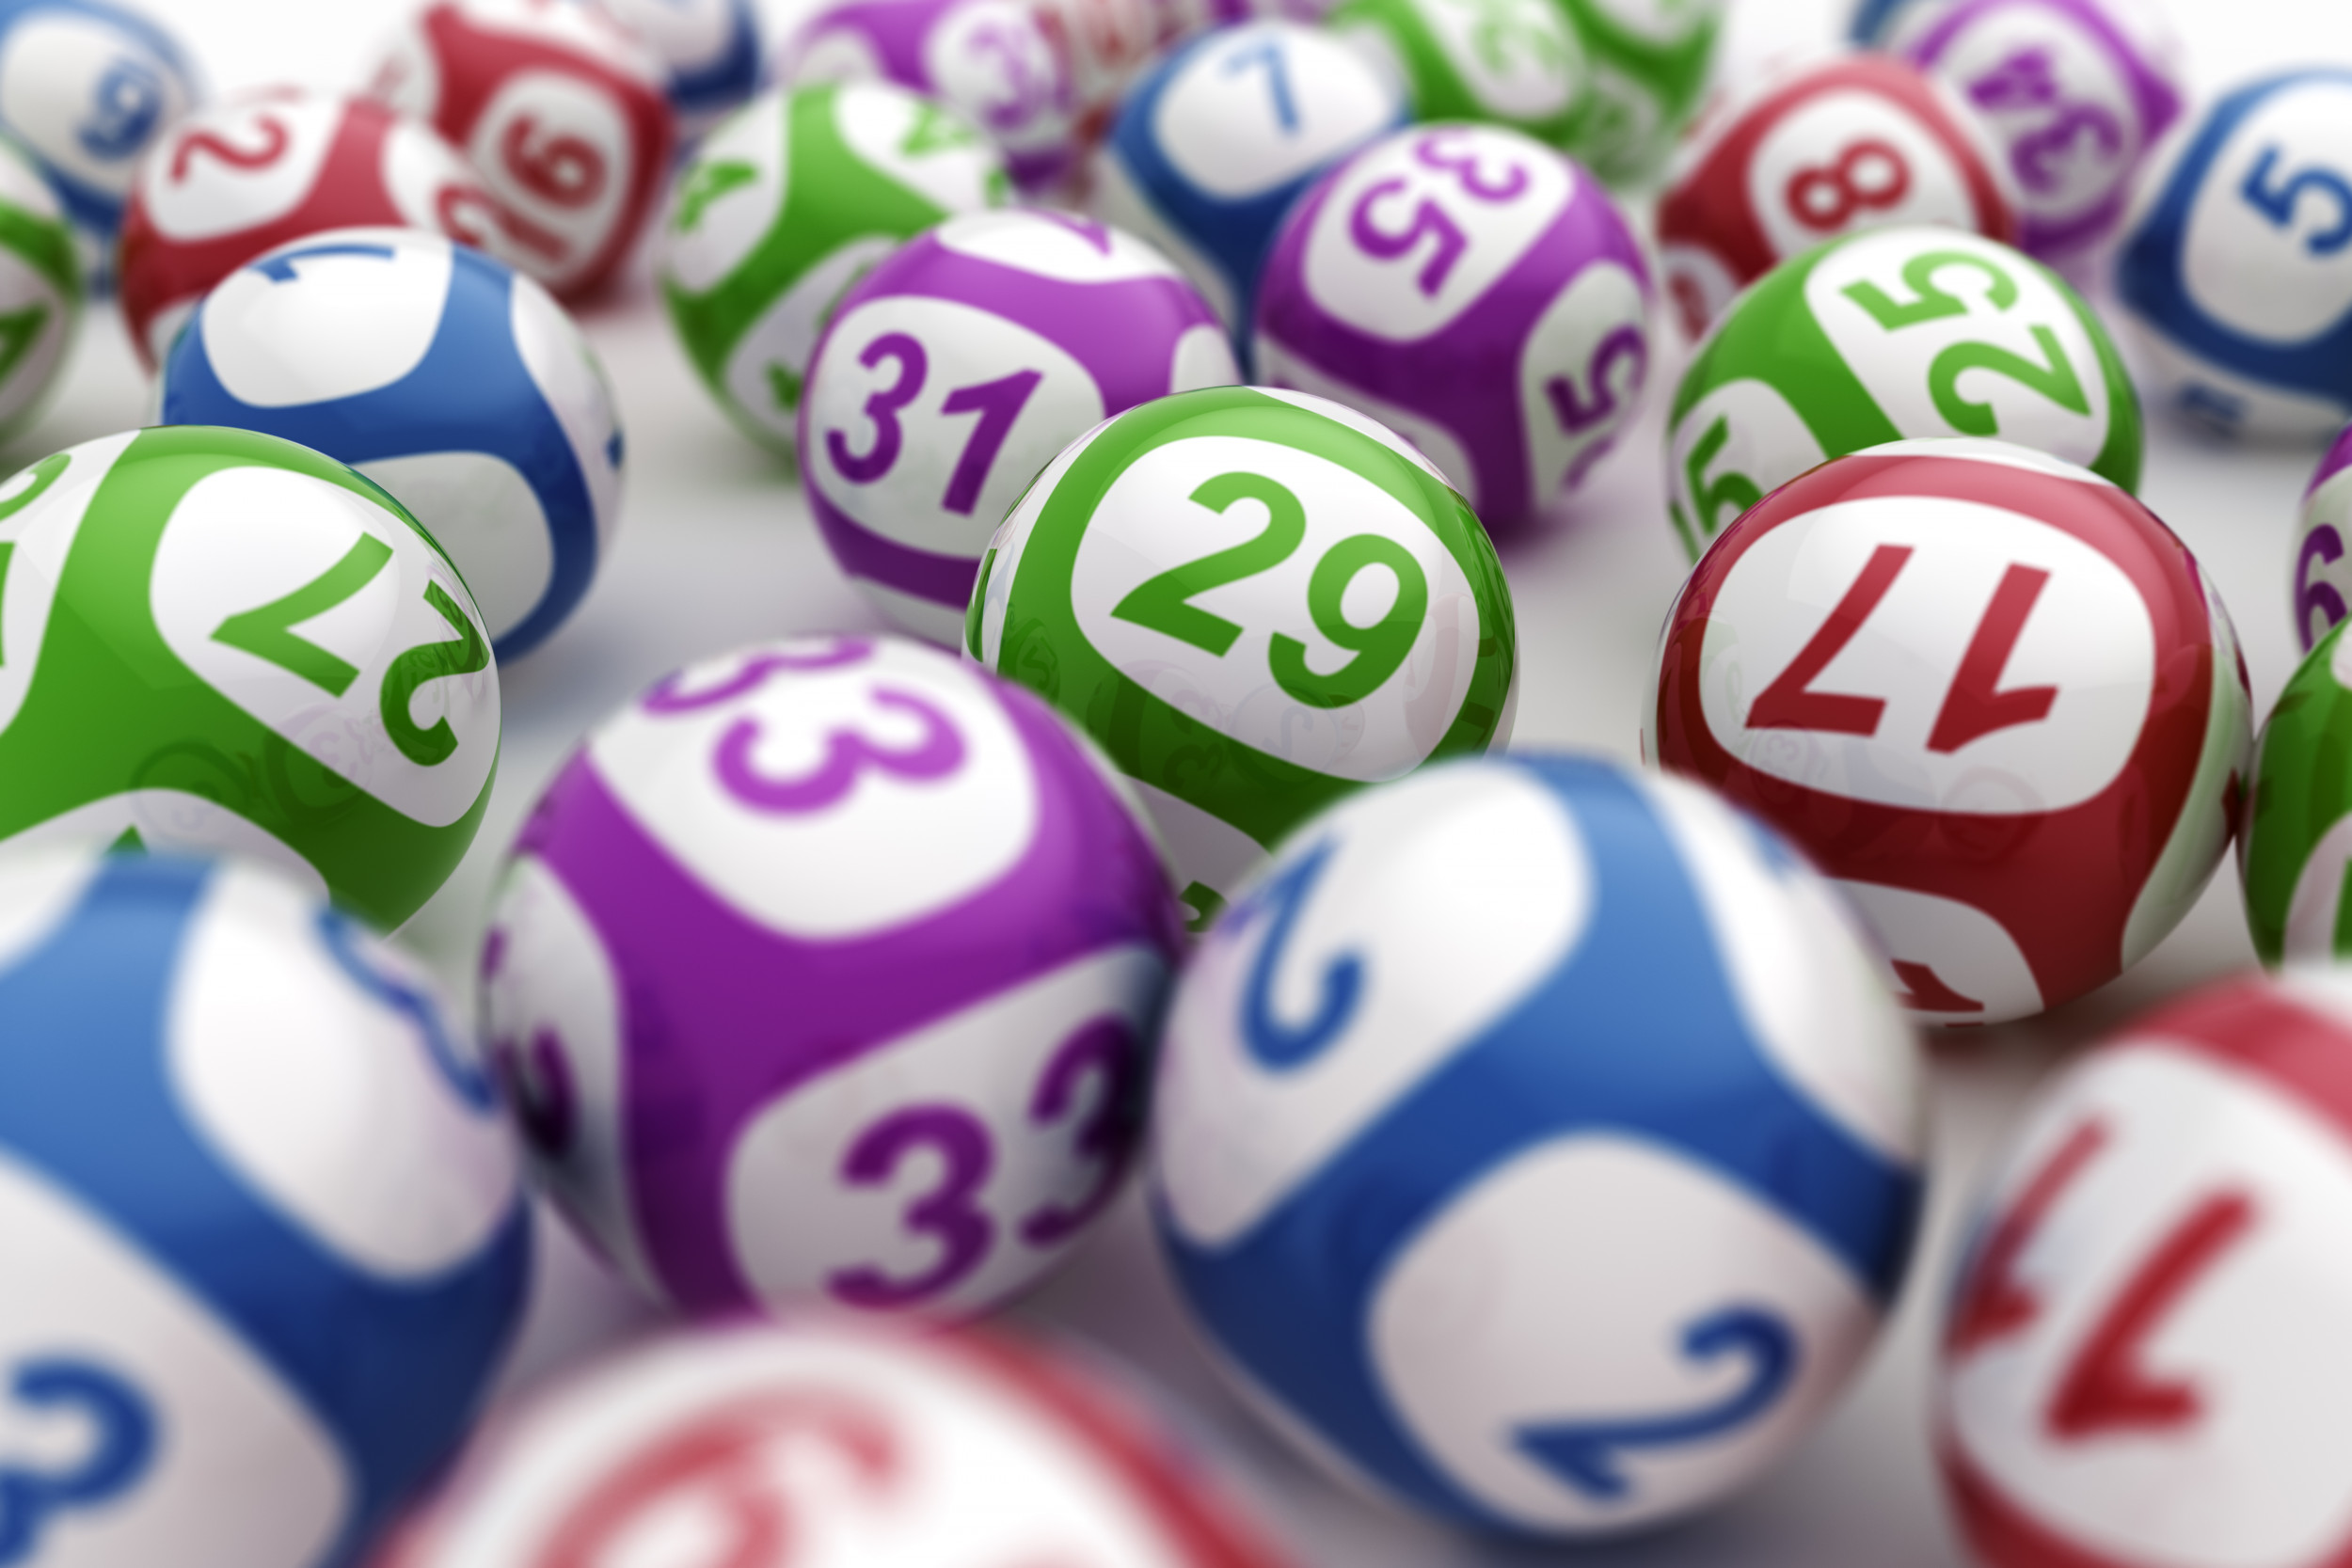 wed night lotto numbers